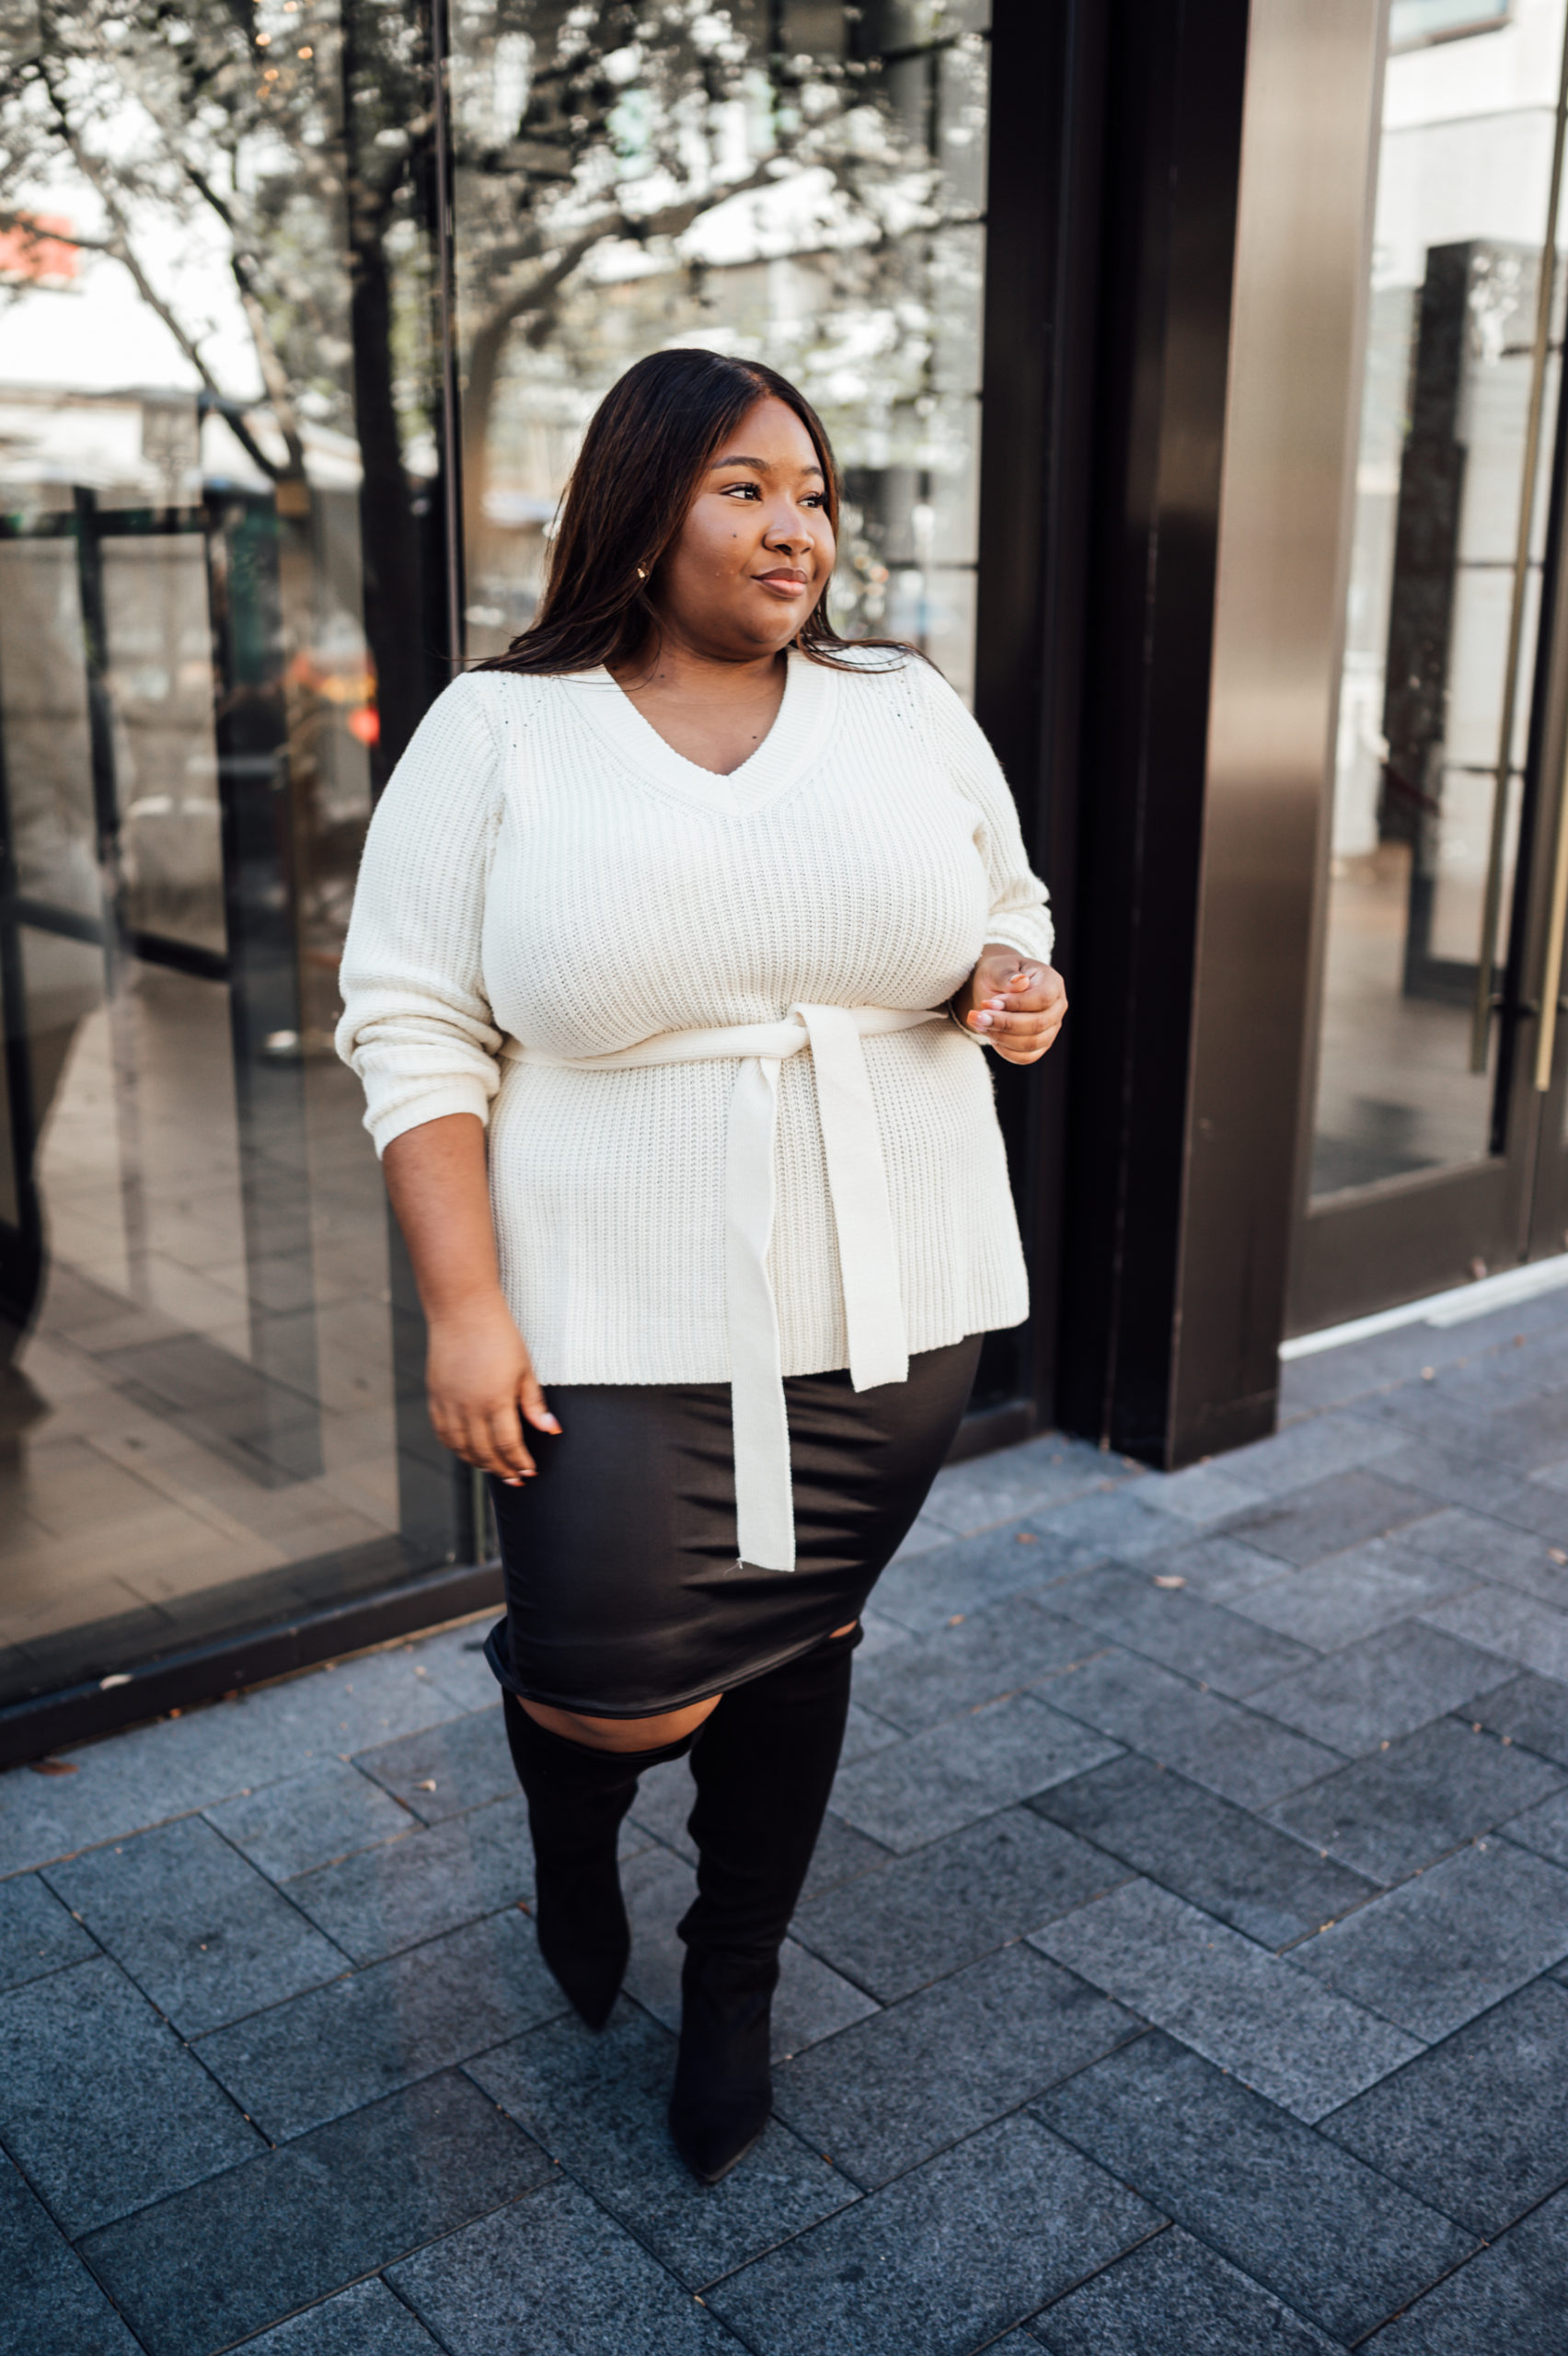 Plus Size winter outfits